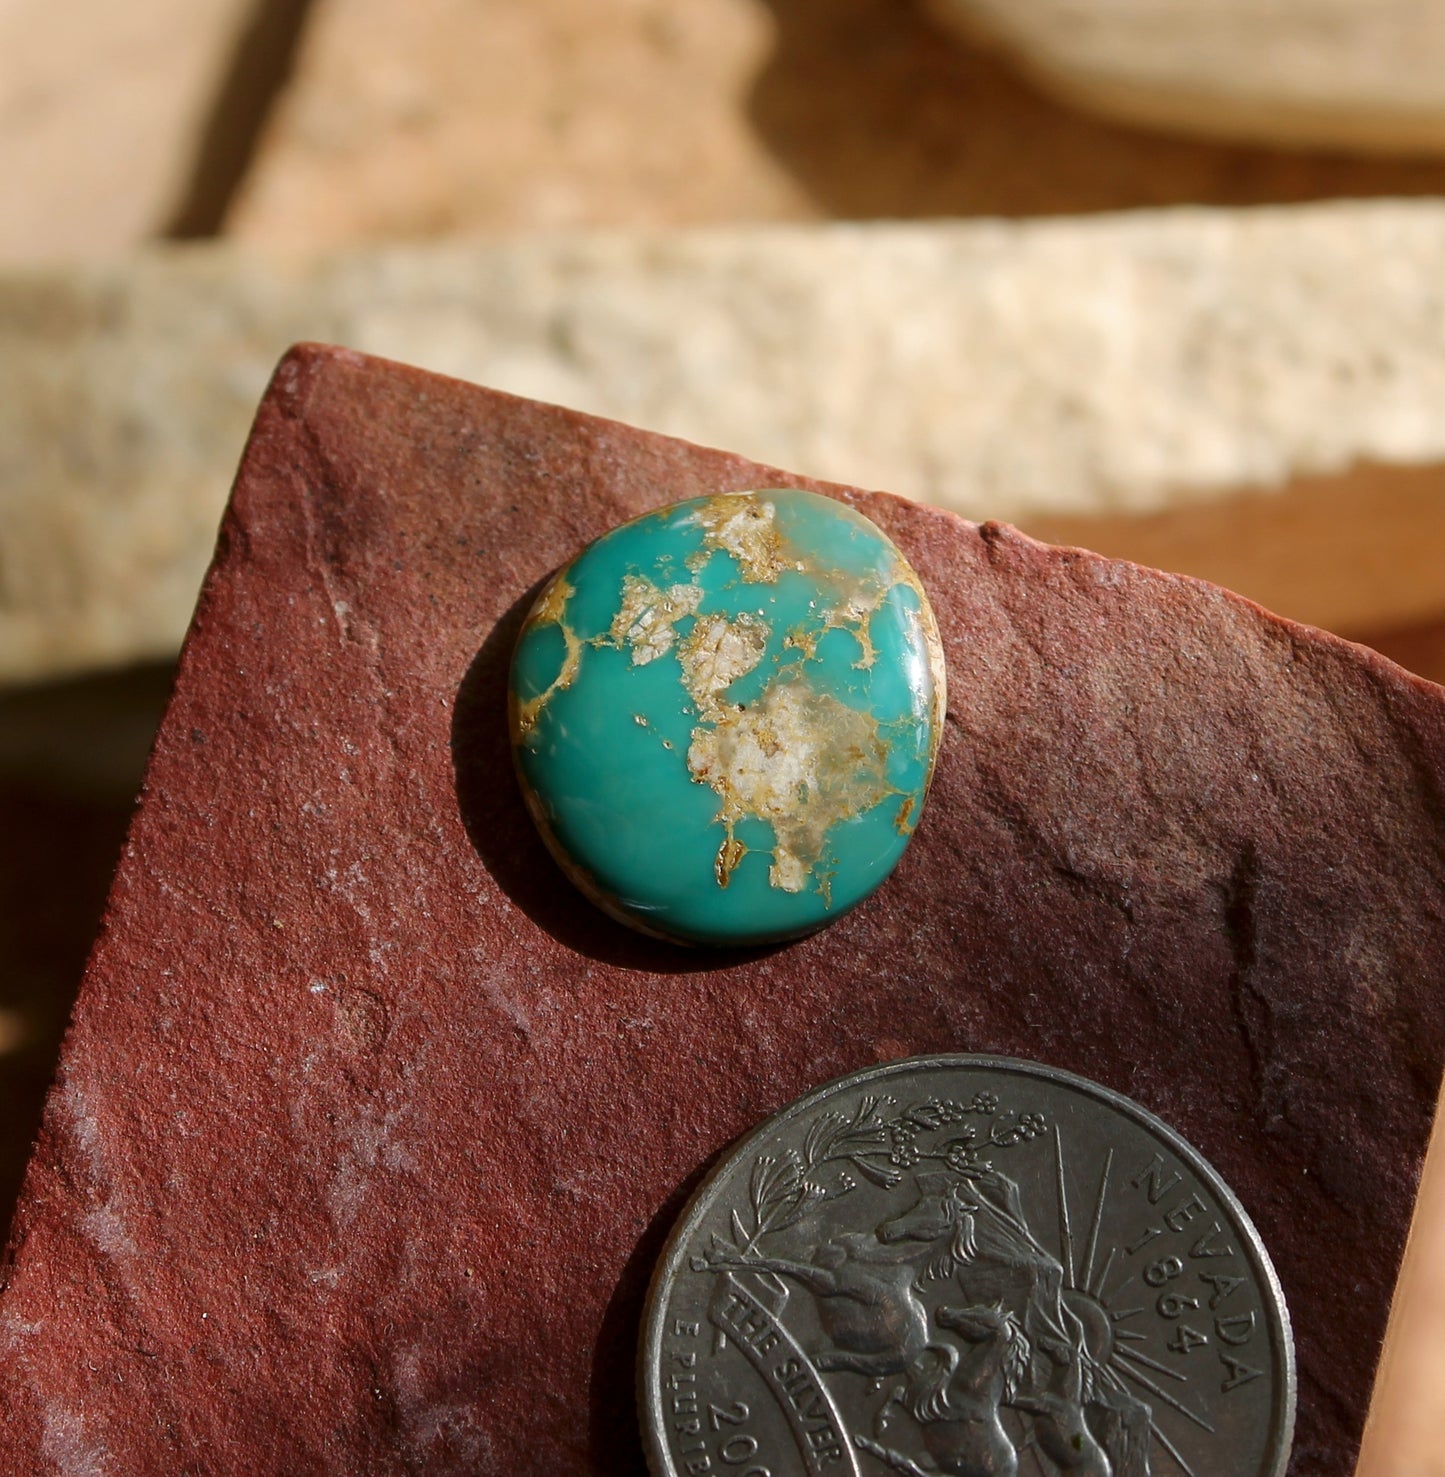 8 carat green Stone Mountain Turquoise cabochon